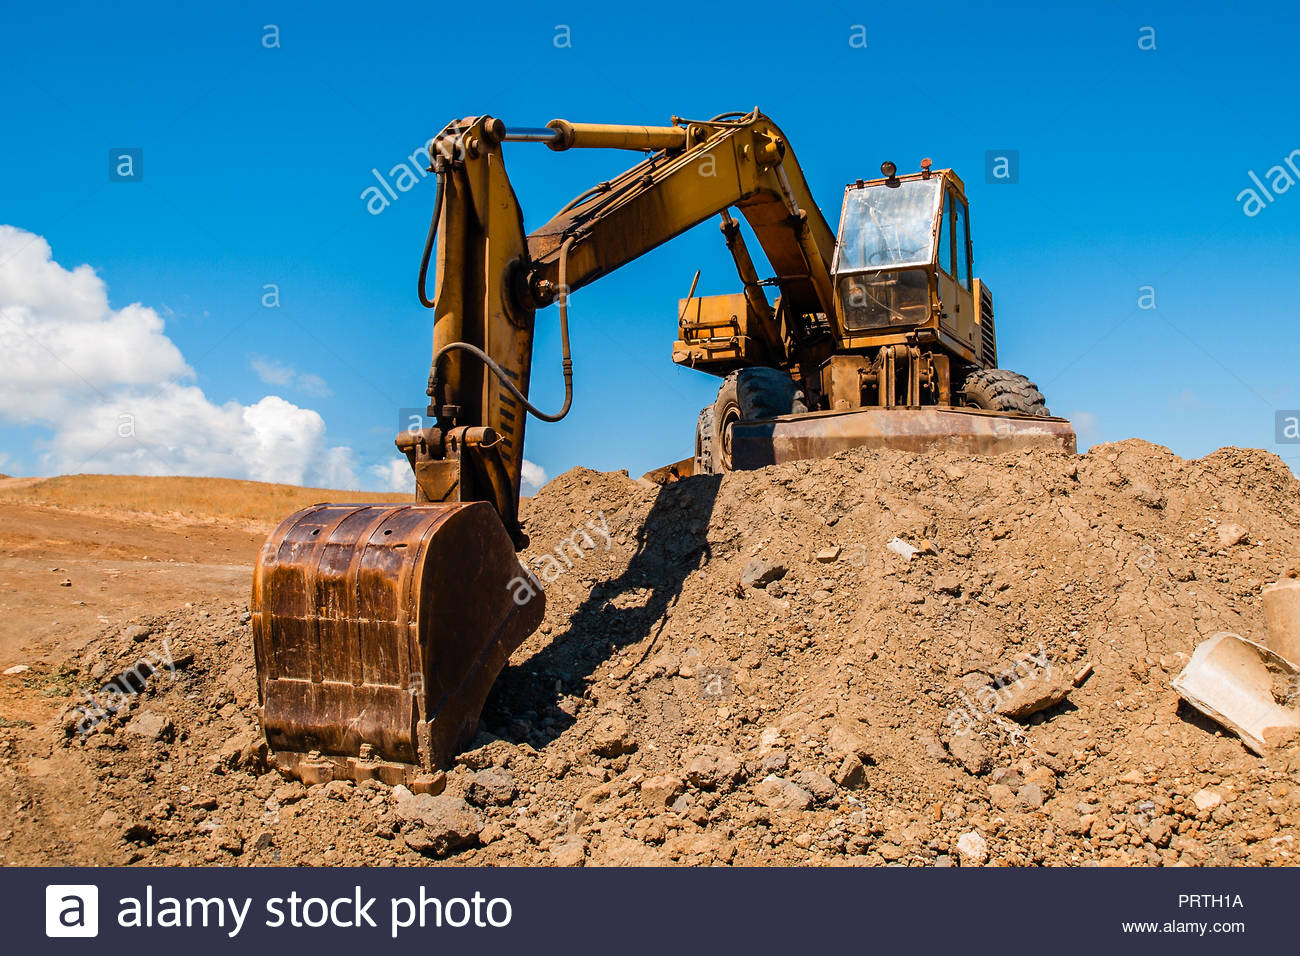 Excavator With Bucket Standing On Soil Hill And Blue Sky